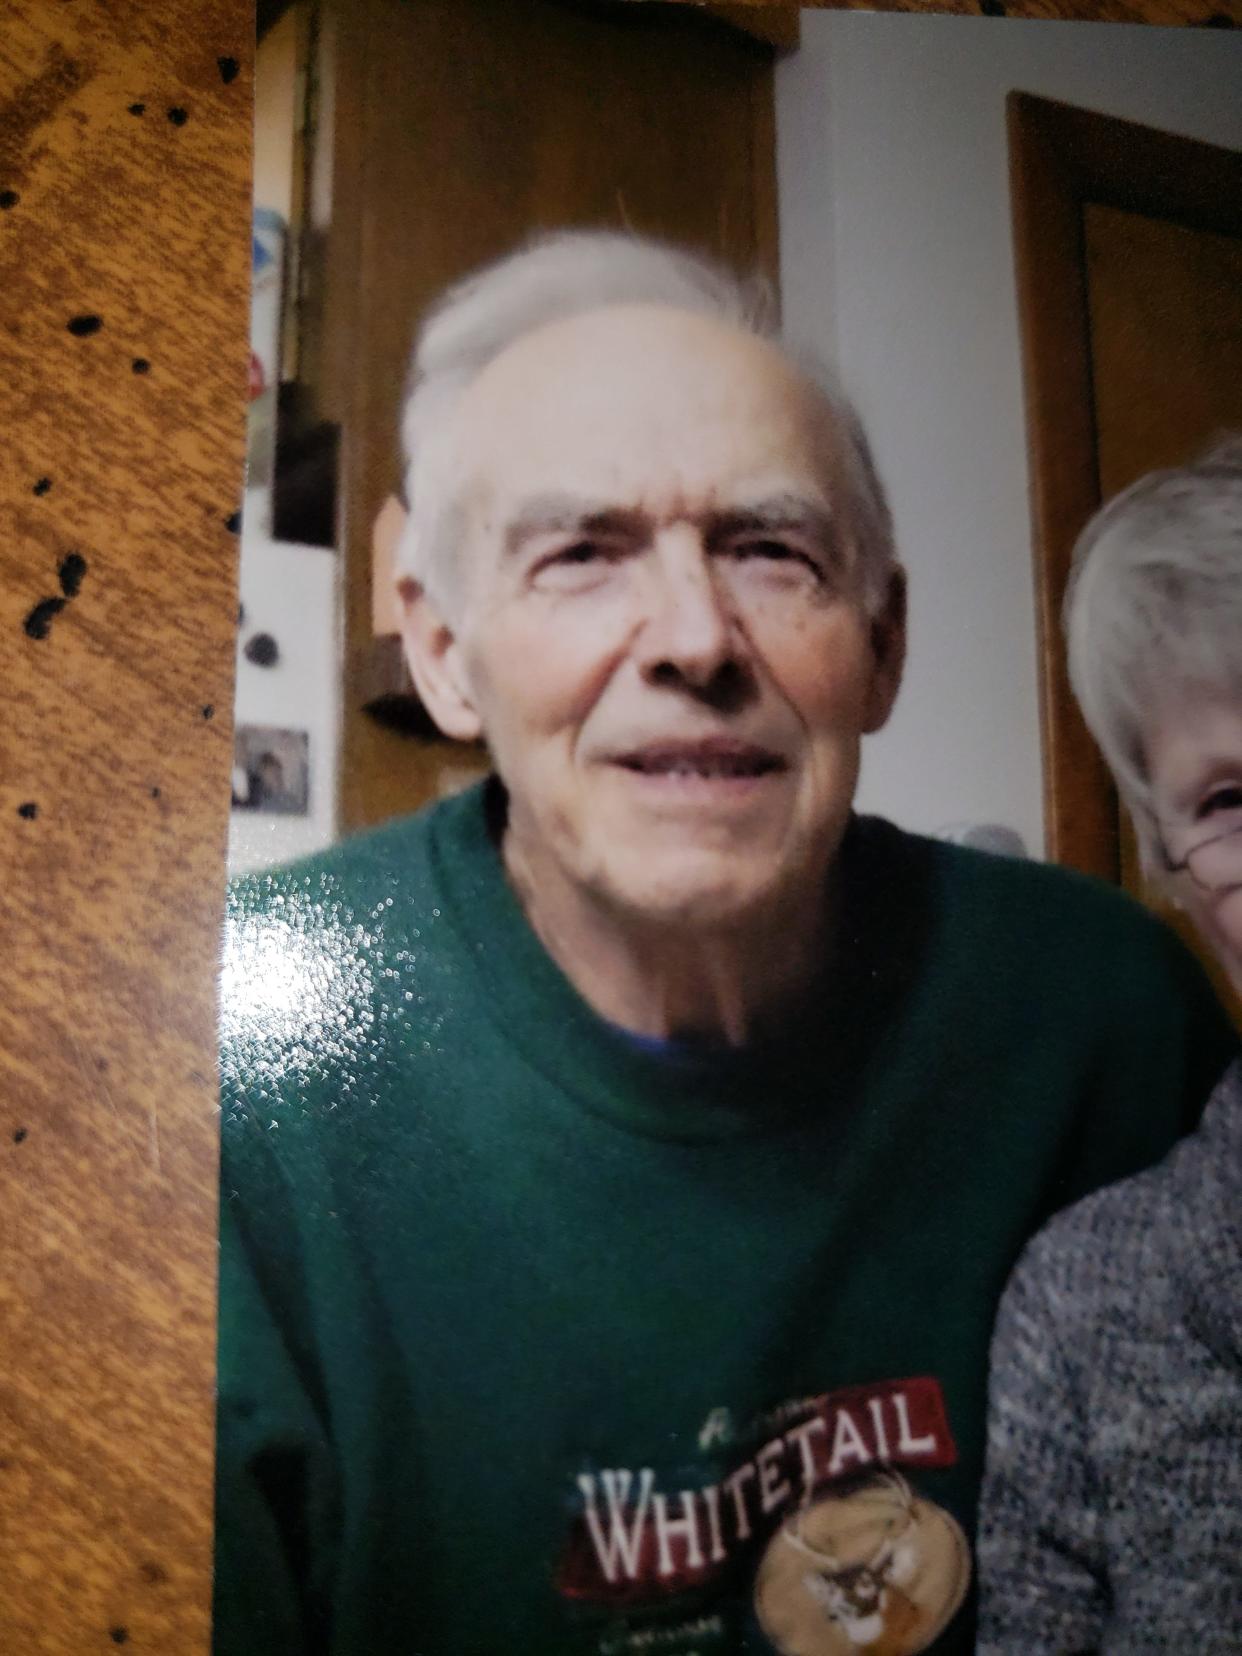 Thomas VanLanen, 75, has been missing from the Green Bay area since 5:30 a.m. Monday.